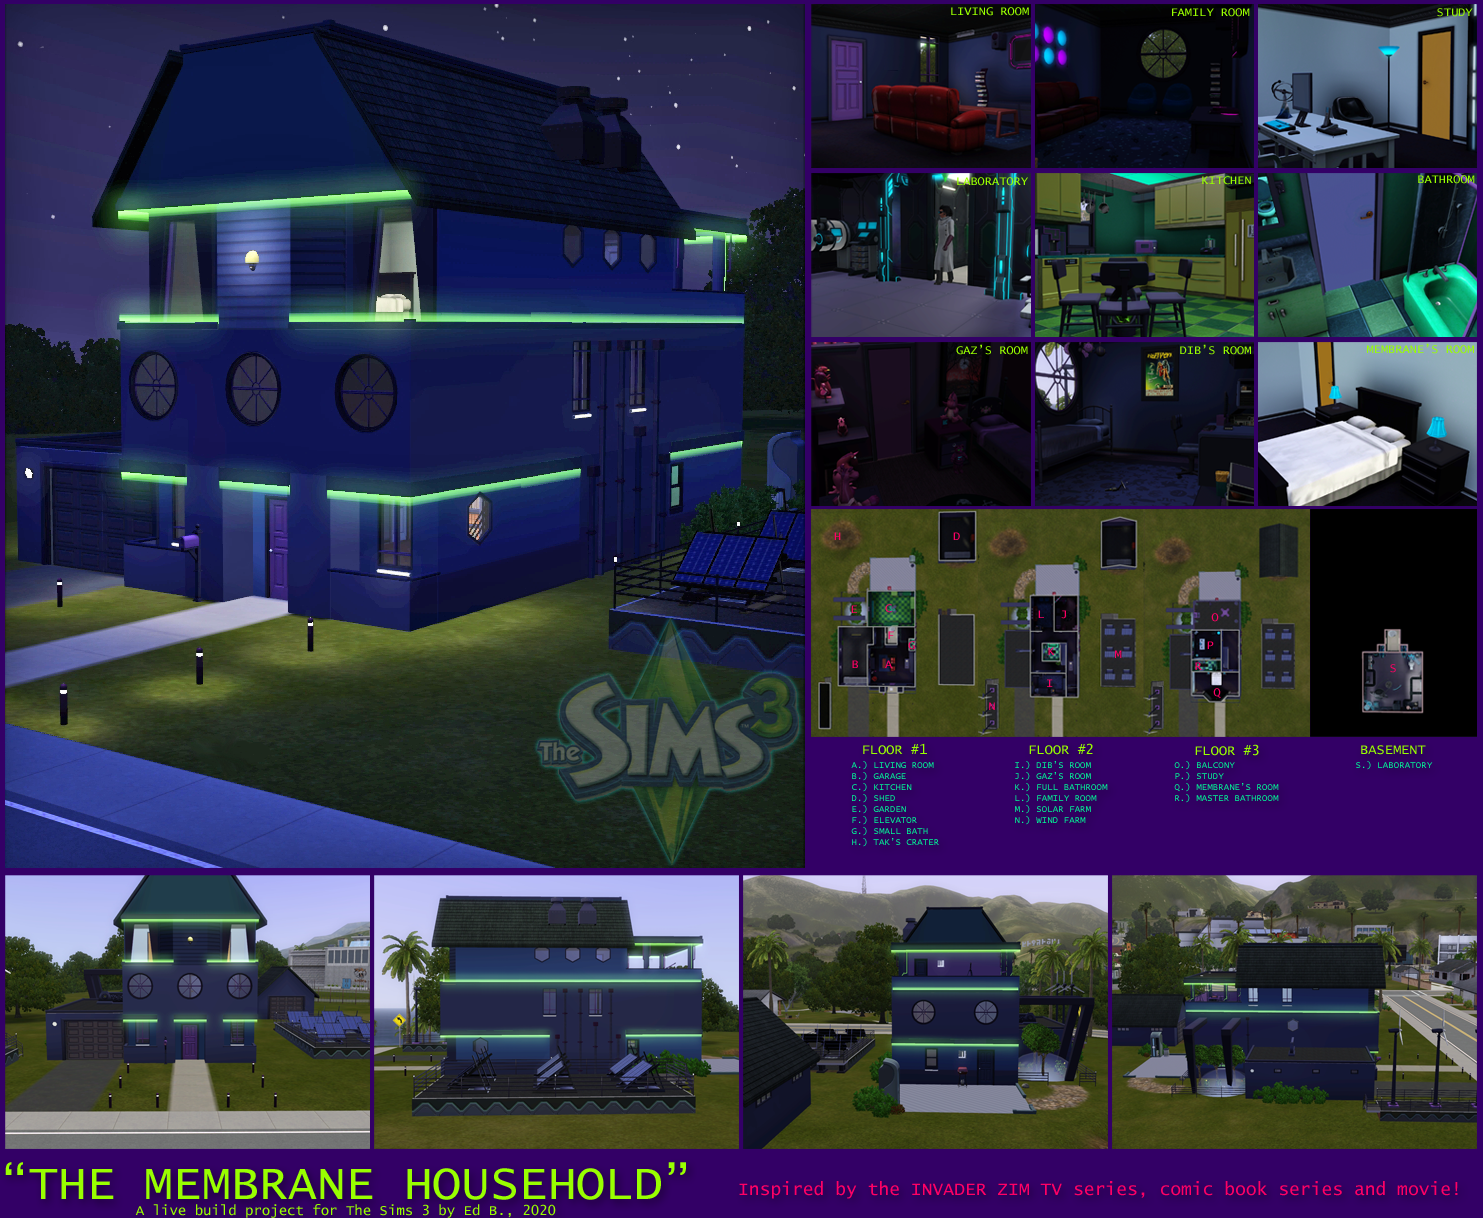 The Sims 3 - Membrane Household by LordEd on DeviantArt